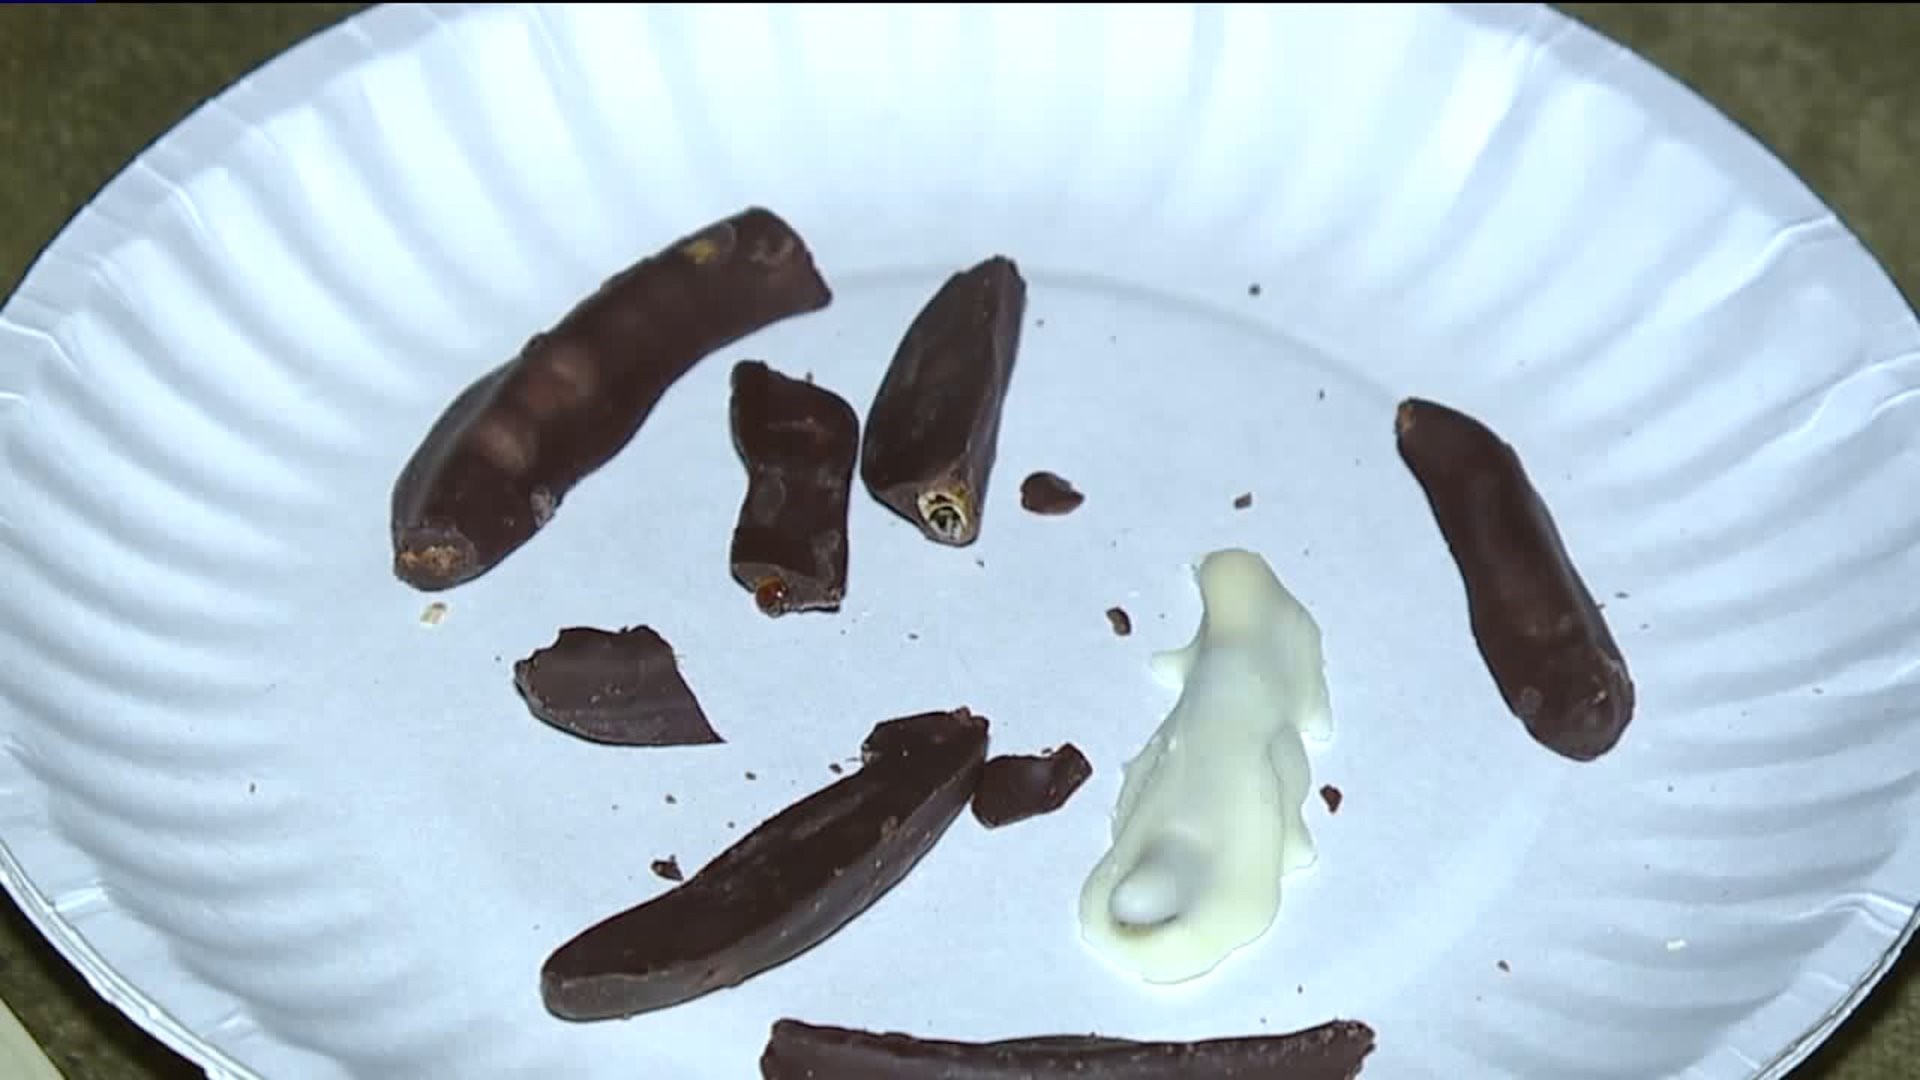 Taste Test: Chocolate Covered Worms